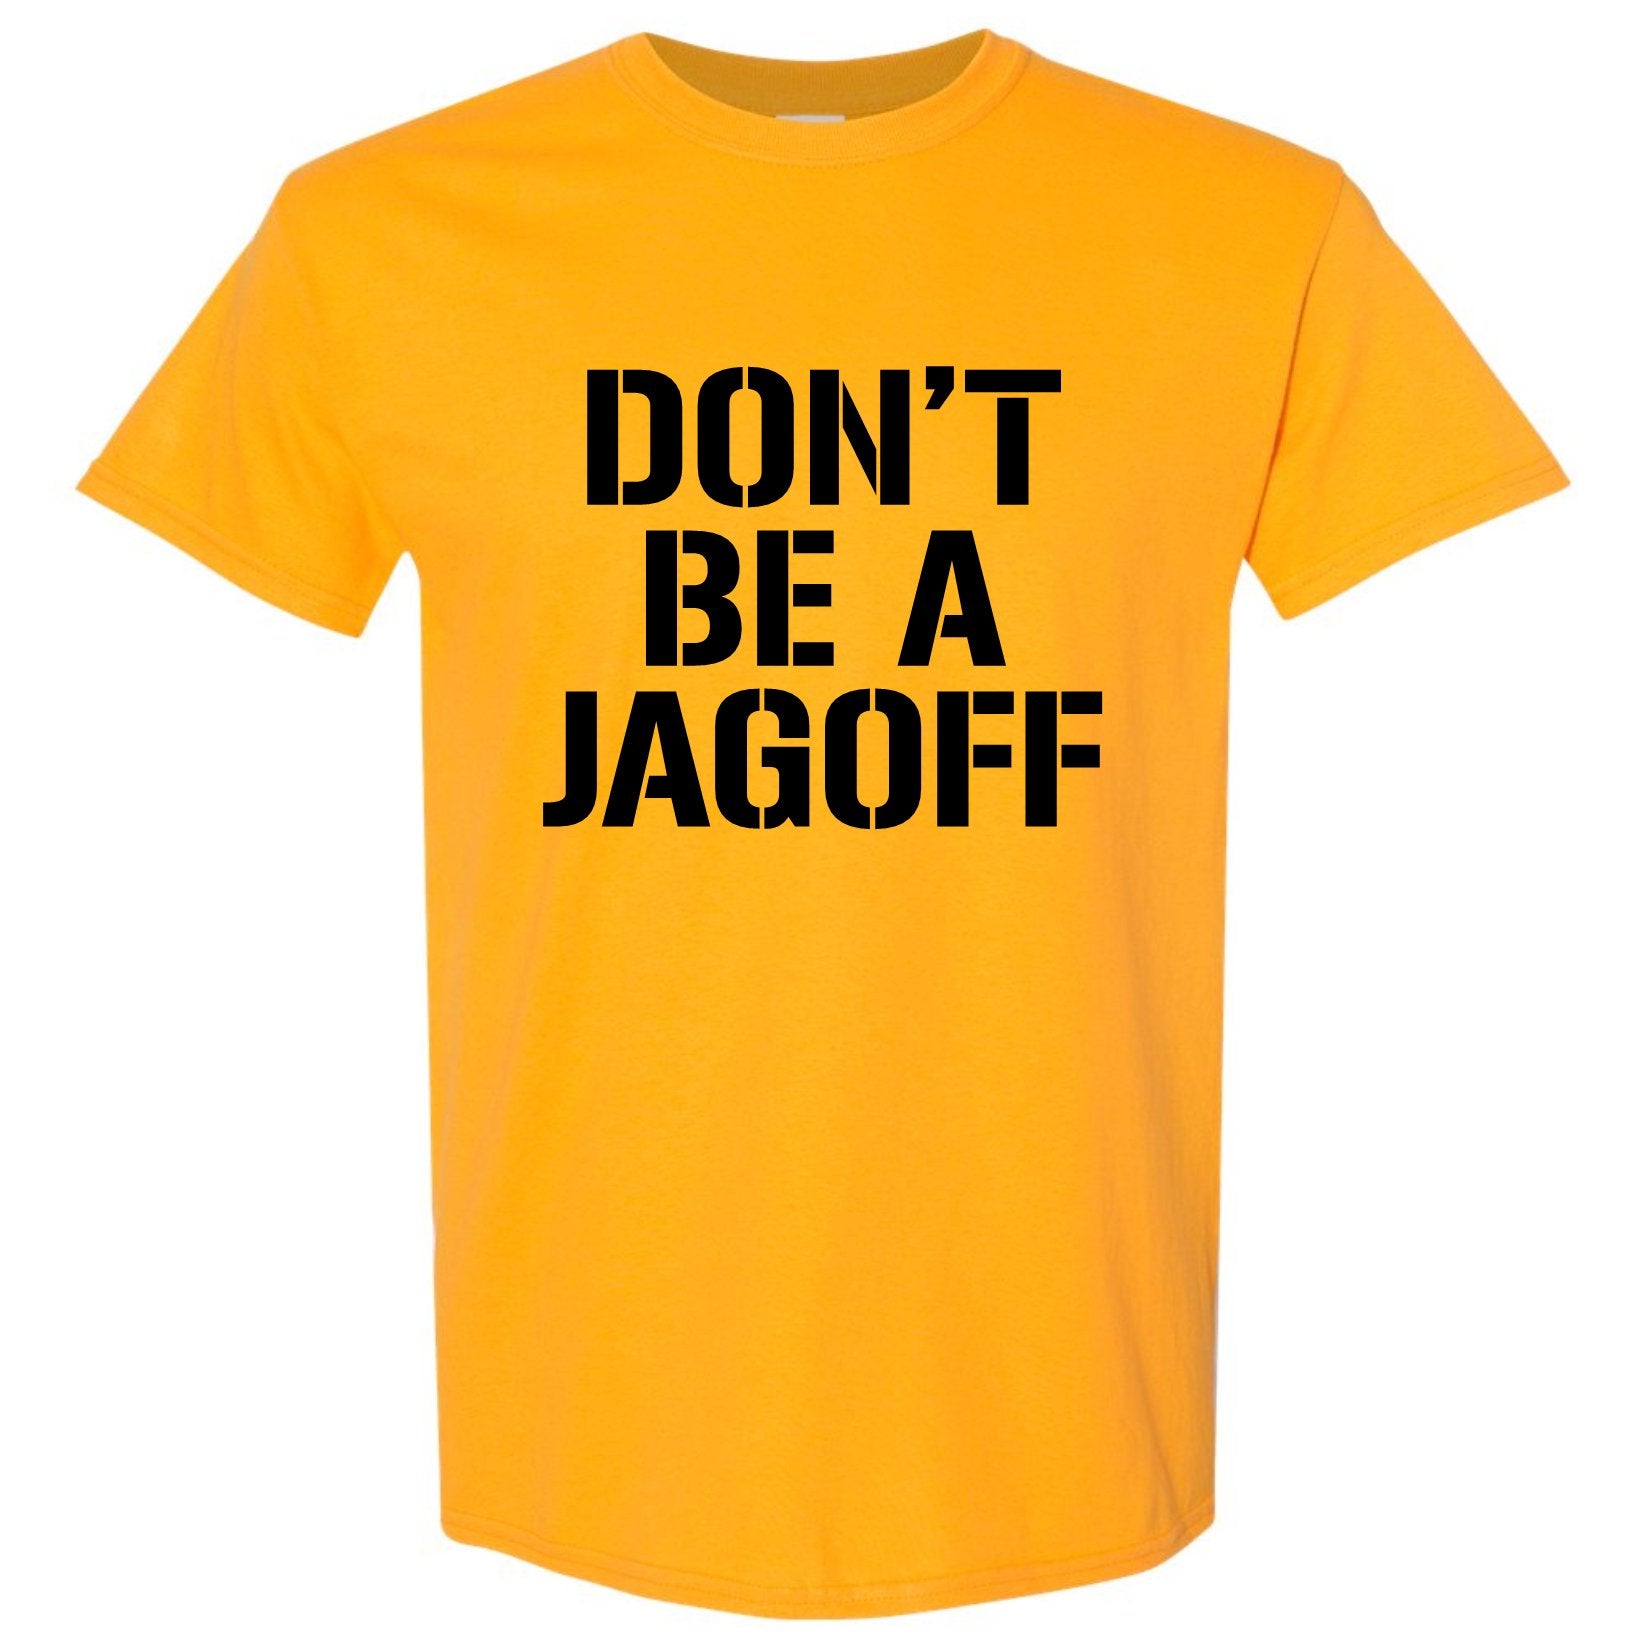 Don't Be a Jagoff Shirt, Pittsburghese T Shirt - Youth and Adult Sizes - SBS T Shop